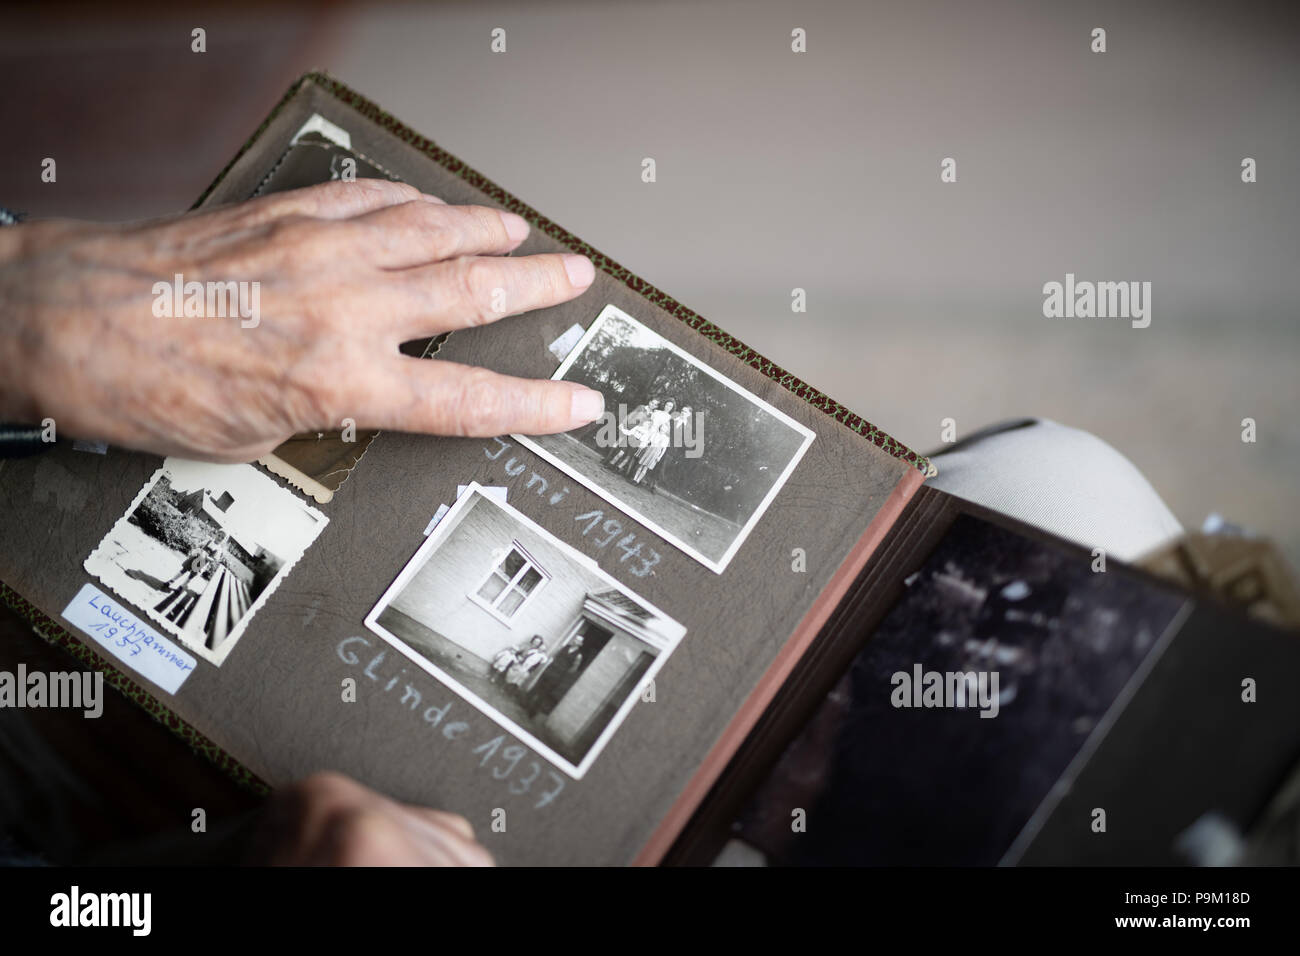 Germany, Hamburg. 09th July, 2018. Guenter Lucks shows in a photo album a photo of his family, which was taken shortly before the Hamburg firestorm in July 1943. The Fire storm is viewed as the worst air-strike on Hamburg 75 years ago. The Allies brought huge parts of Hamburg into ashes, killing 35,000 people. Credit: Daniel Reinhardt/dpa/Alamy Live News Stock Photo